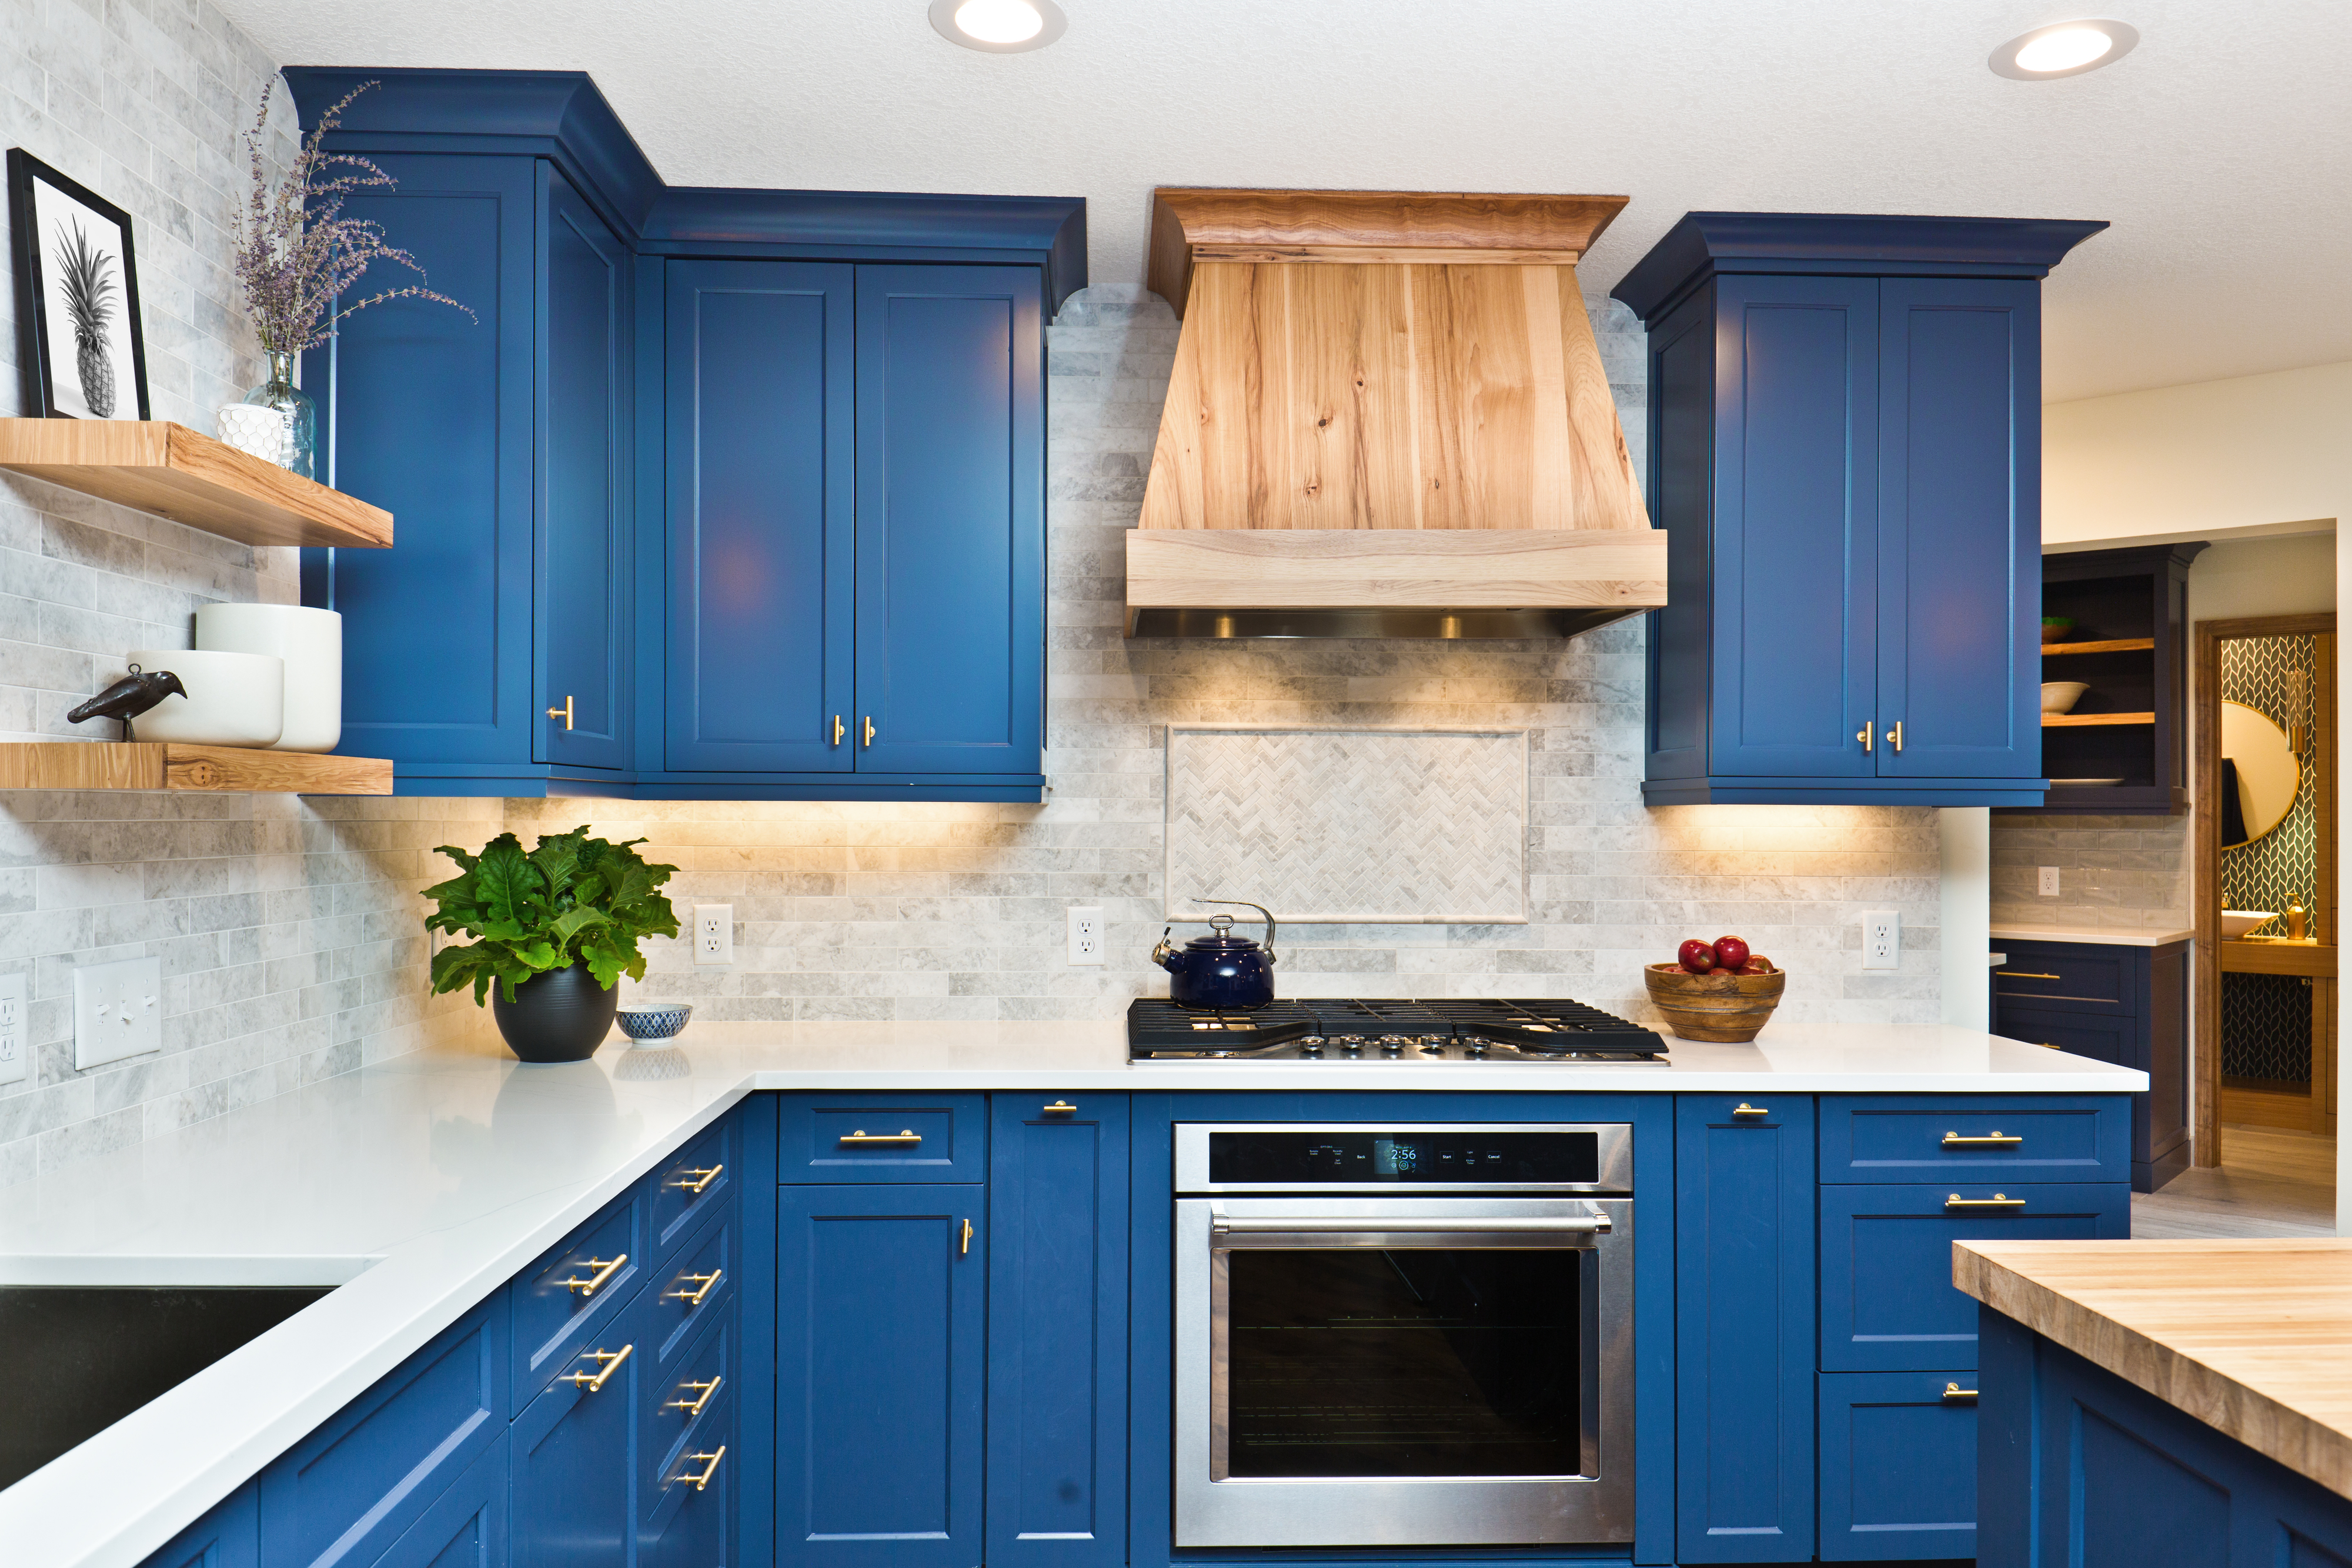 A kitchen with blue cabinets and modern accents